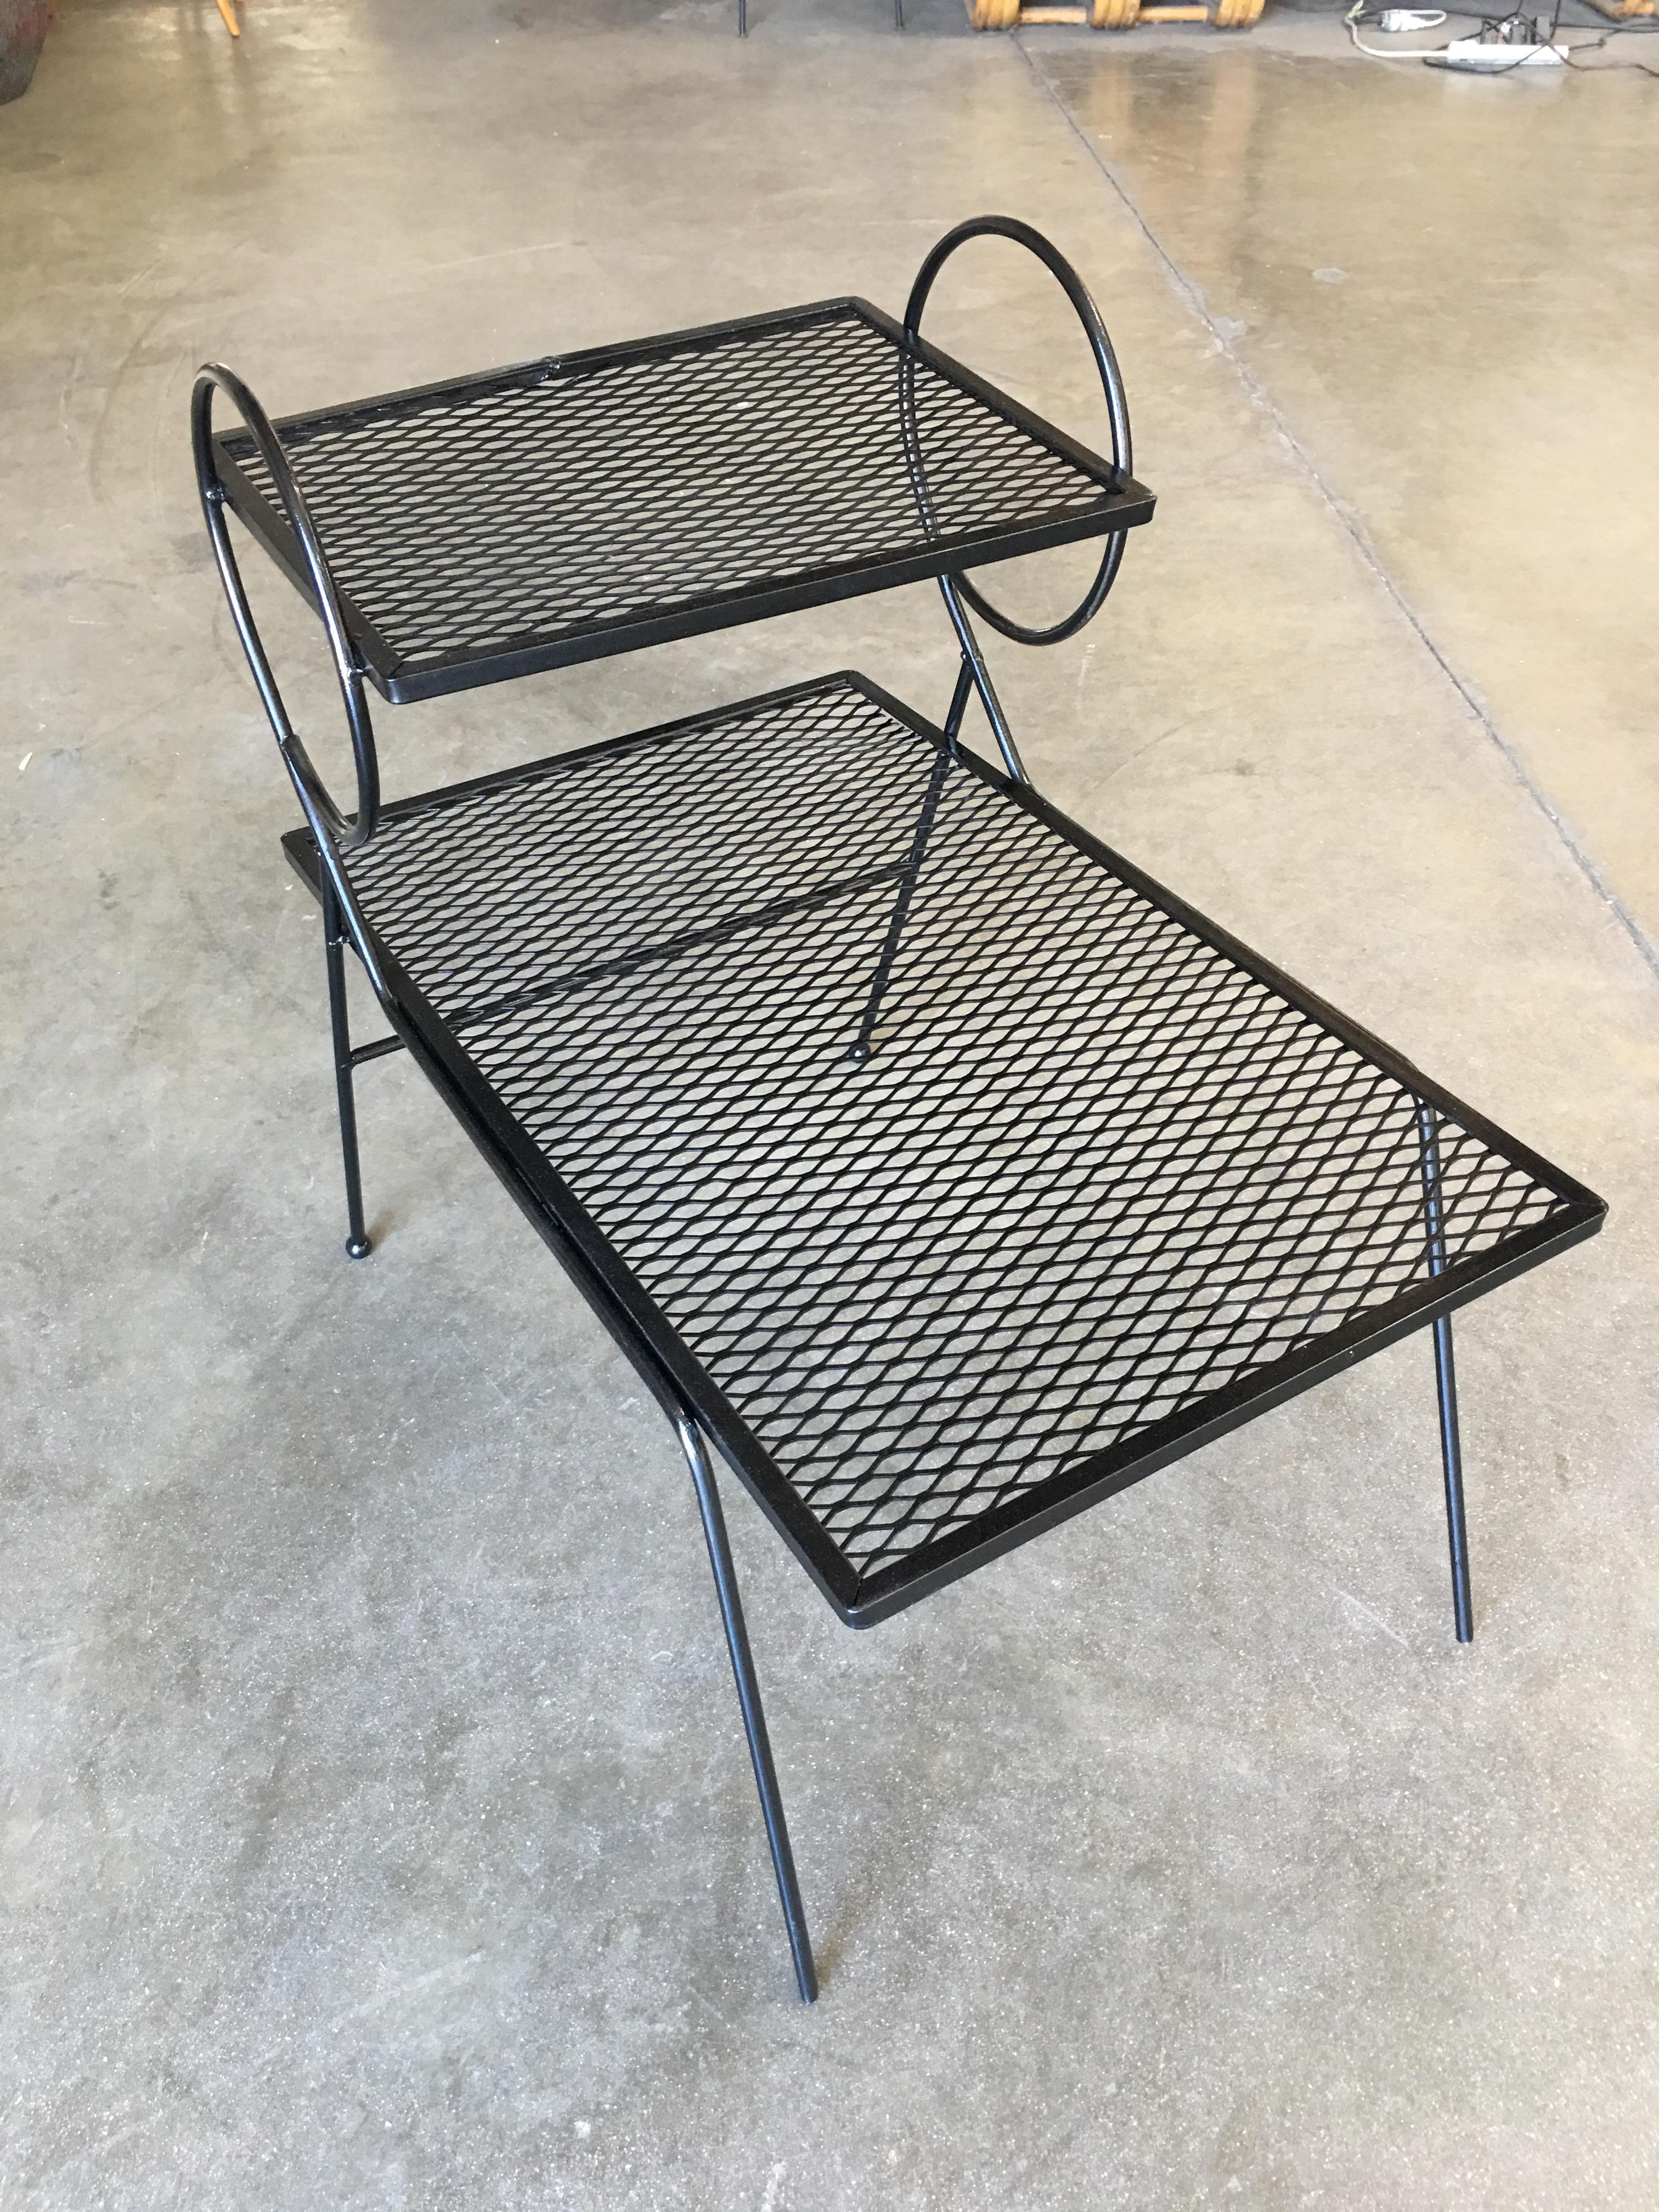 Vintage outdoor/patio Art Deco side tables with circle legs and steel mesh top by the Woodward company, circa 1940 and made in the USA by Woodard. All outdoor furniture can be repainted in the color of your choice at no extra charge.